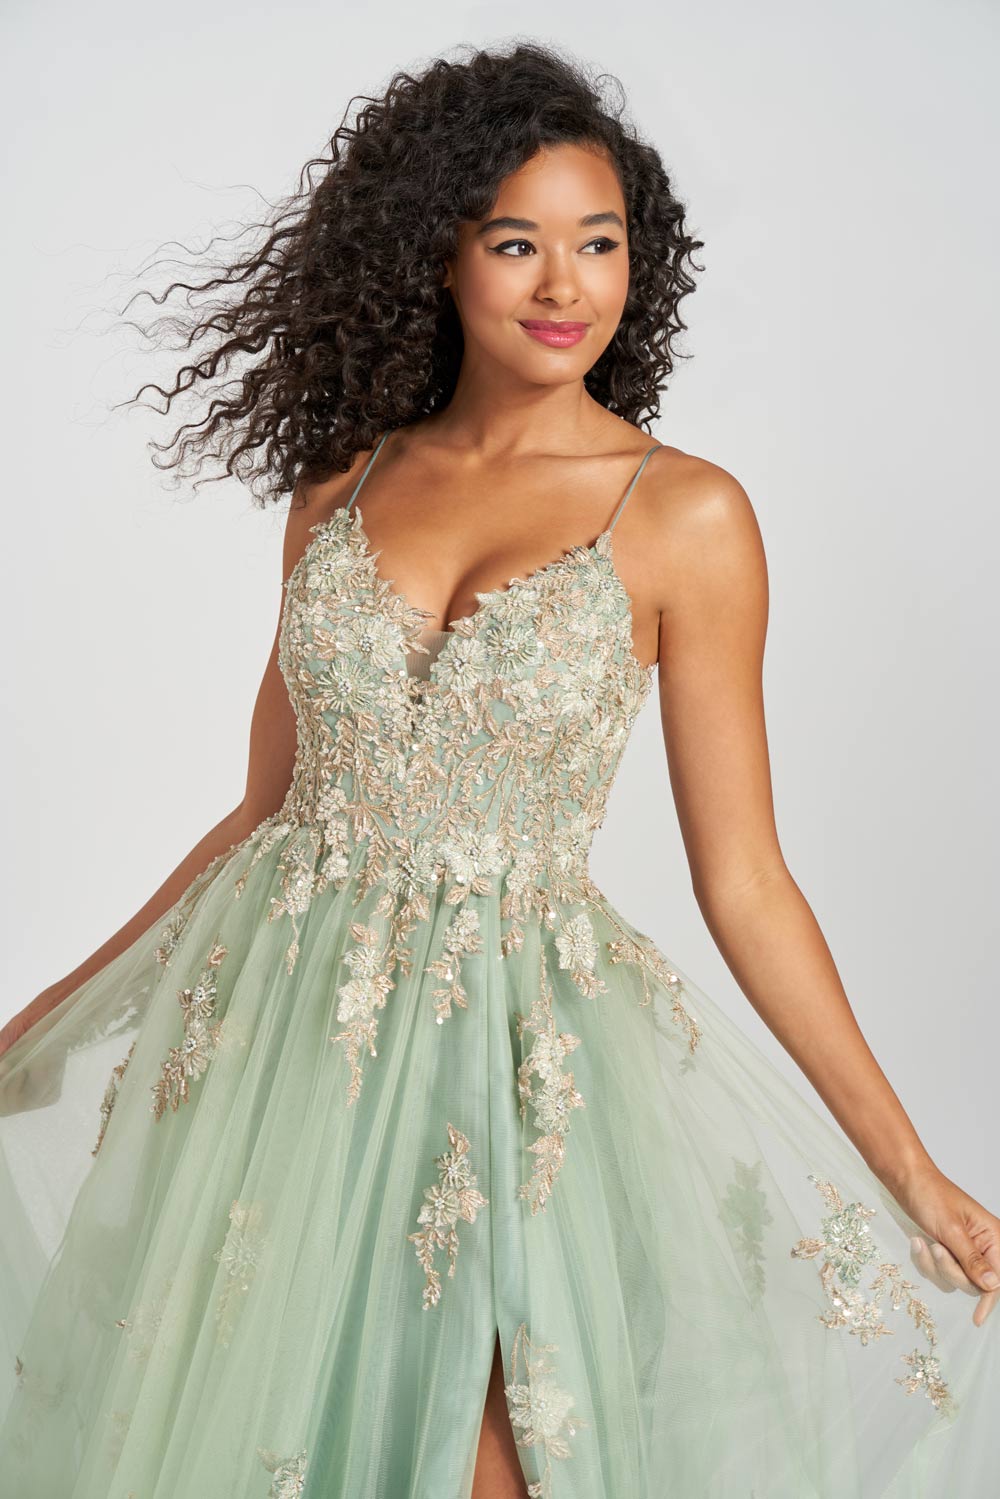 photo is a close up. Black curly haired model showing detail of the ivy prom dress.